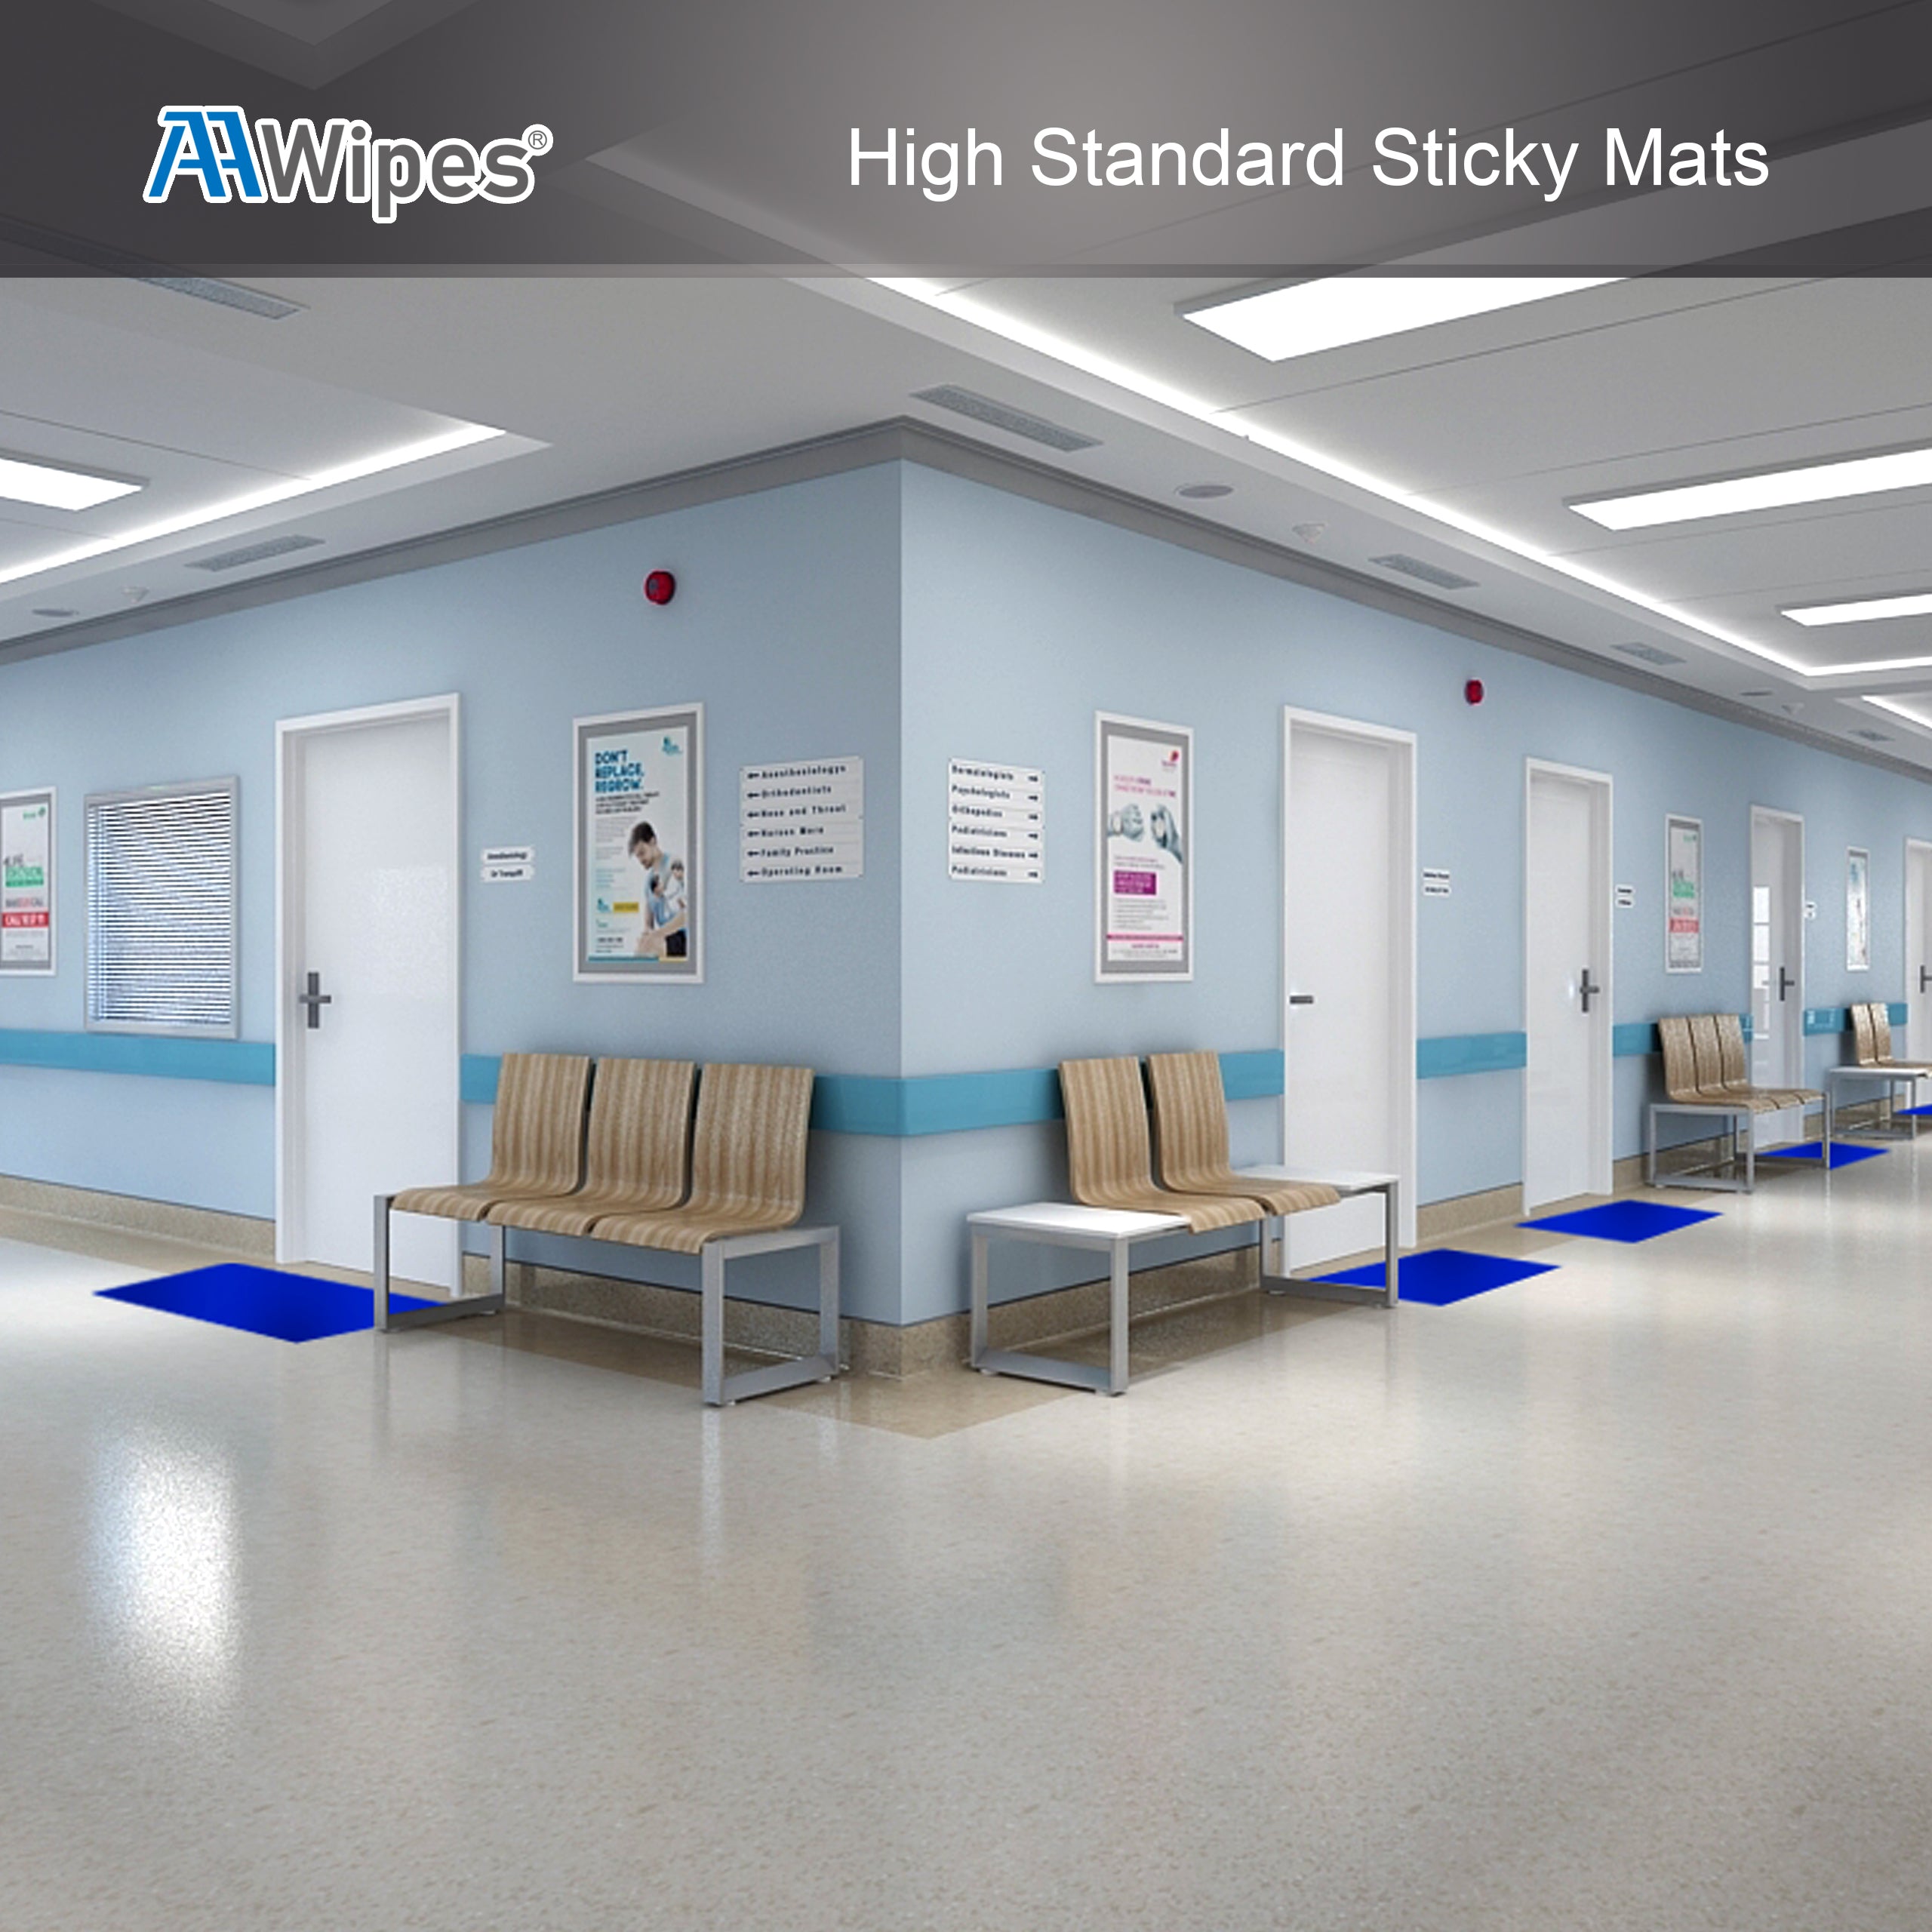 Sticky/Tacky/Adhesive Mat 18 x 36 Blue (Case of 4 Mats,30 Sheets Each)  for Cleanroom Laboratory Hospital Construction Pets